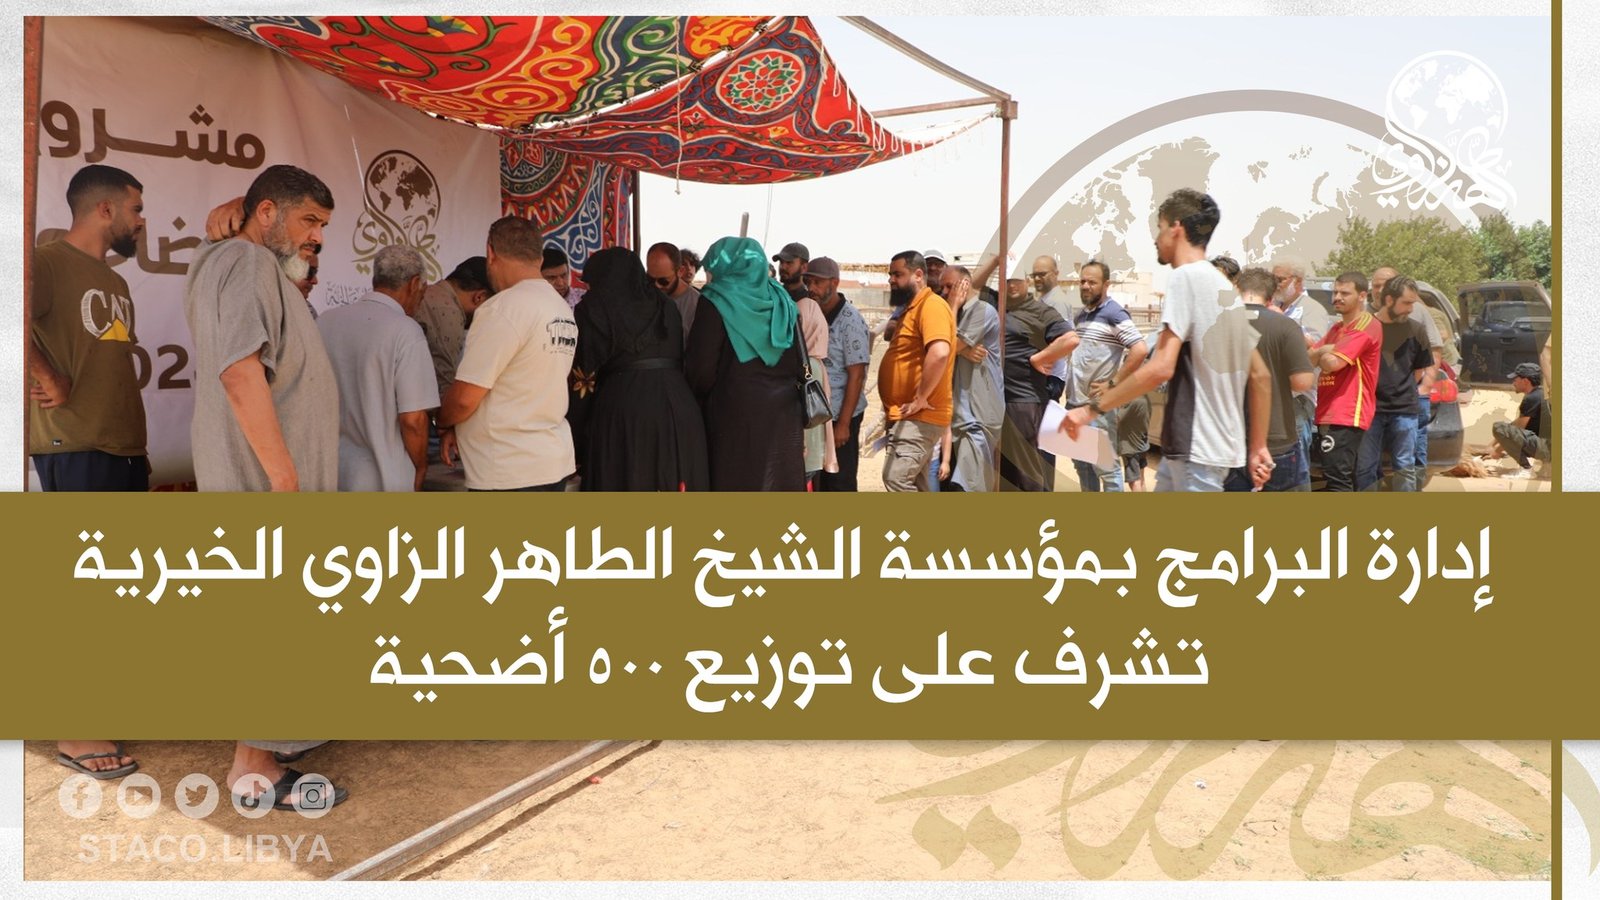 The Programs Department at the Sheikh Tahir Al-Zzawi charity organization supervises the distribution of 500 sacrifices